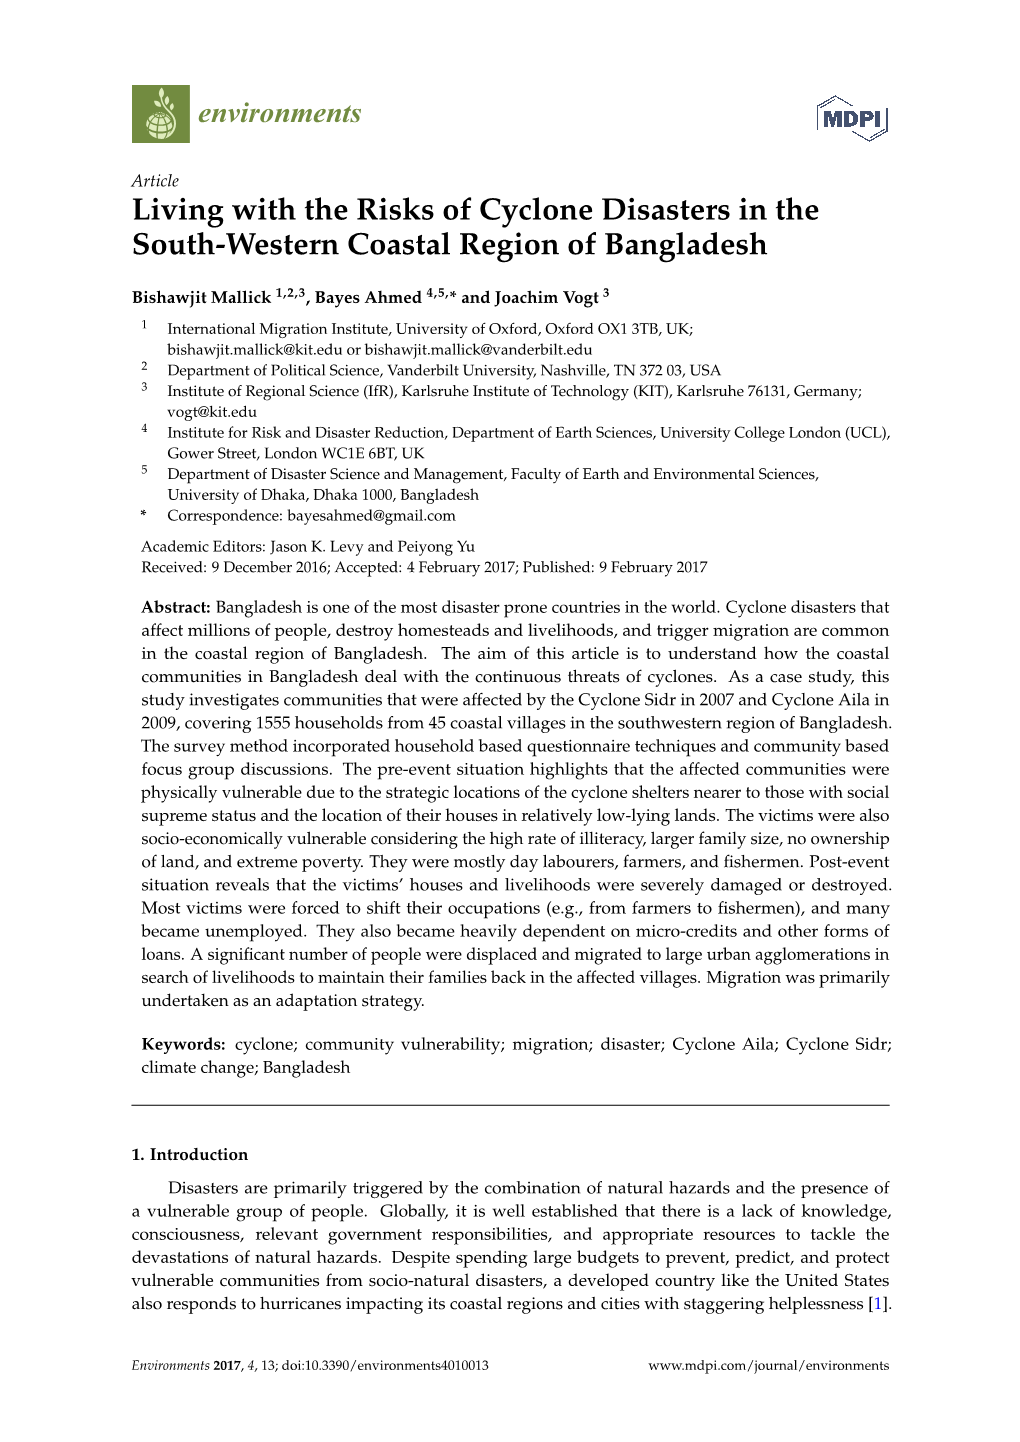 Living with the Risks of Cyclone Disasters in the South-Western Coastal Region of Bangladesh